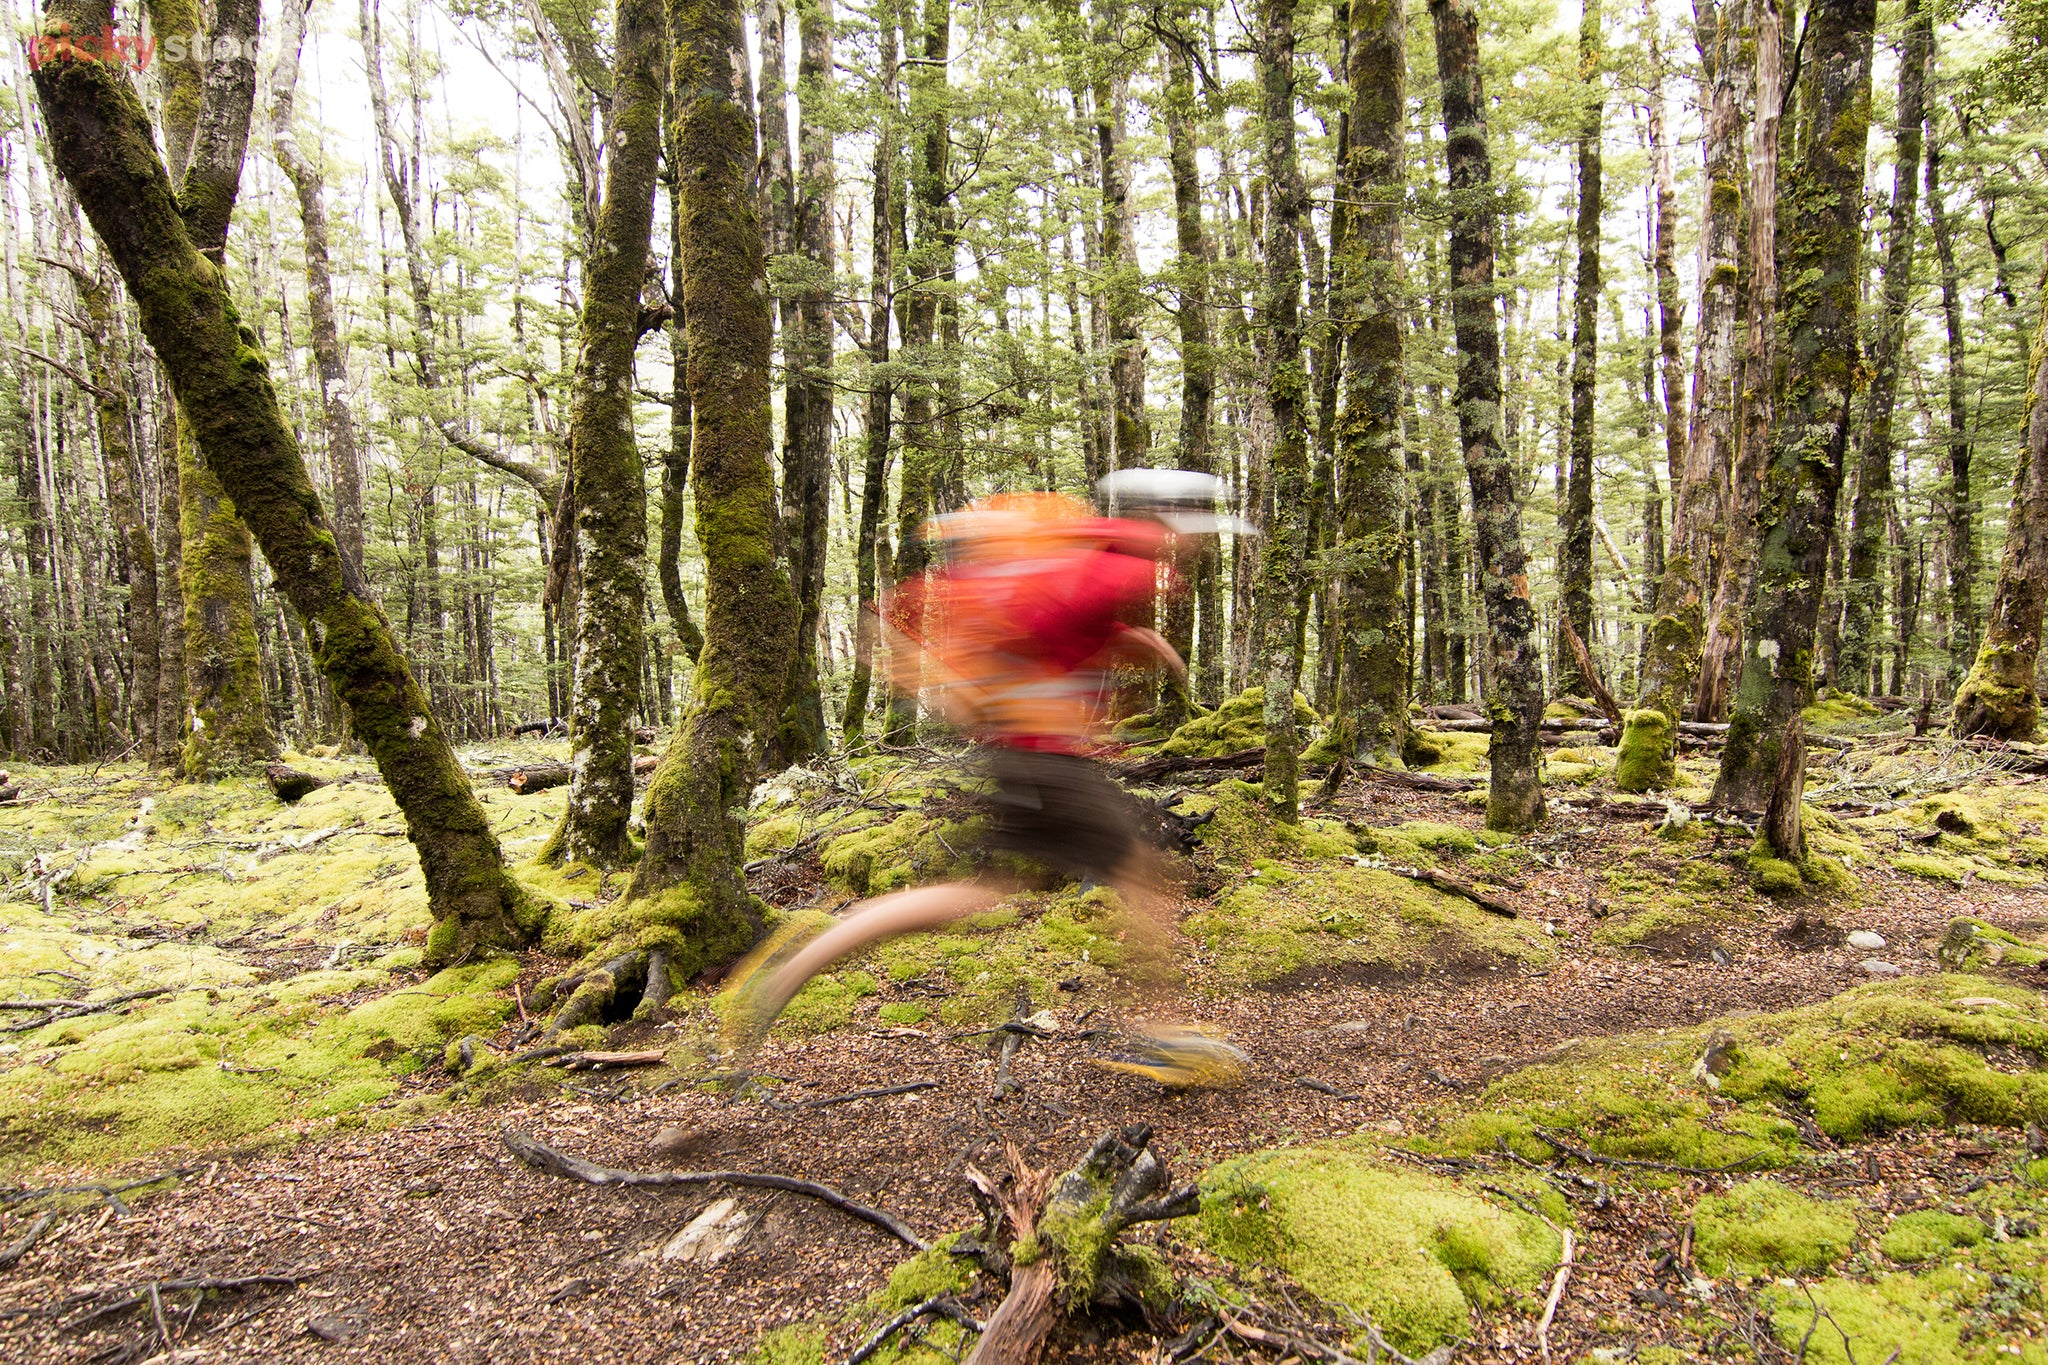 Landscape of a deep moss-covered forest clustered in a primordial state. A runner in a bright red jacket blurred across the trail like a jolt of electricity.